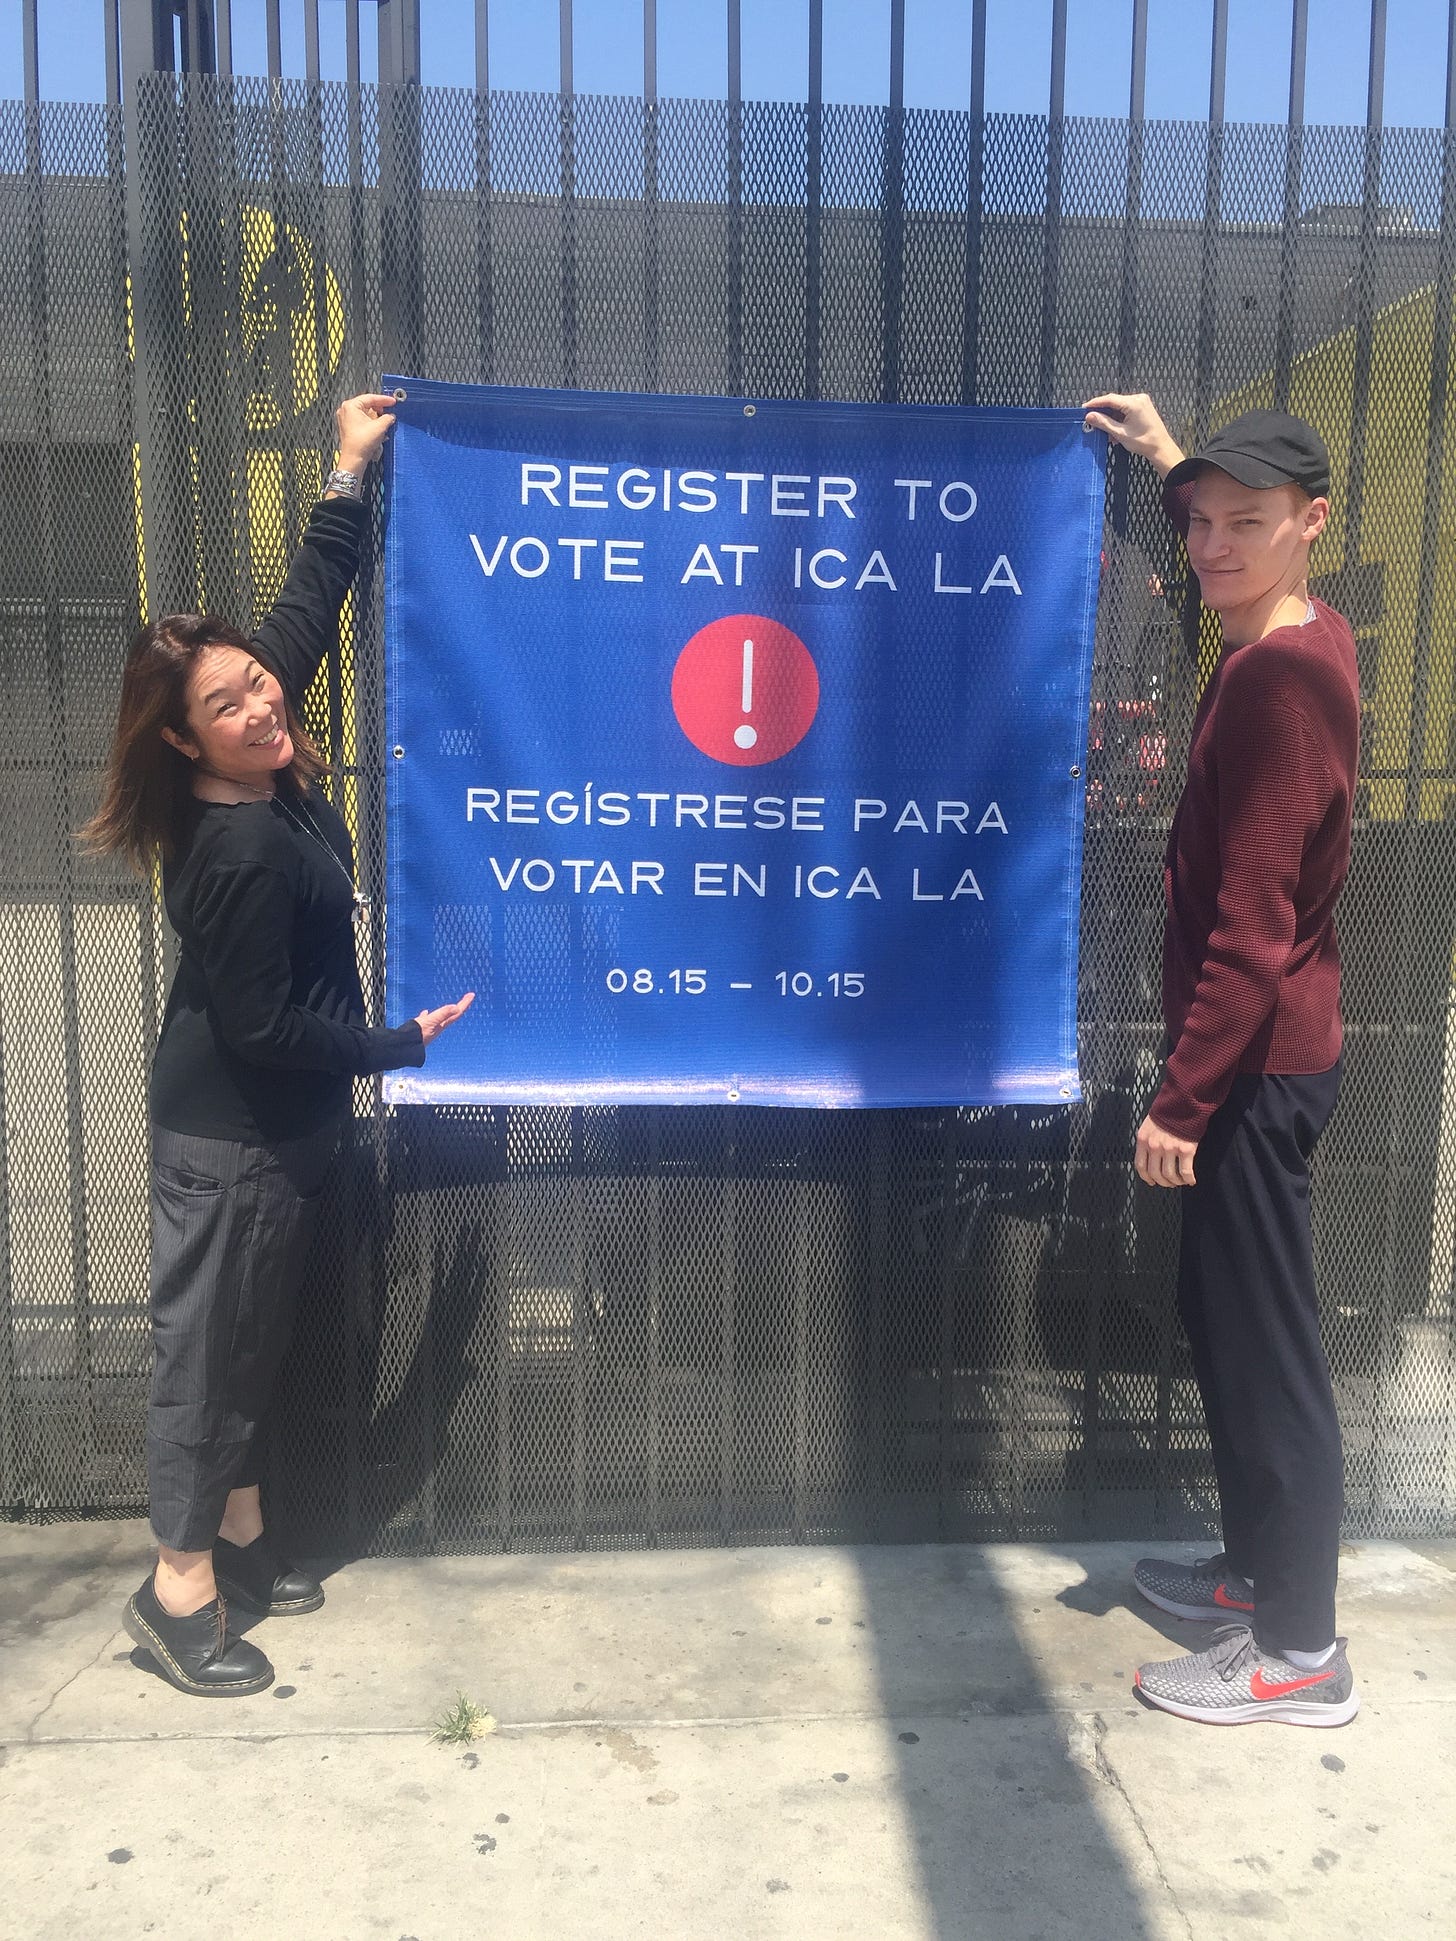 Two people hold up a blue sign in English and Spanish encouraging people to register to vote